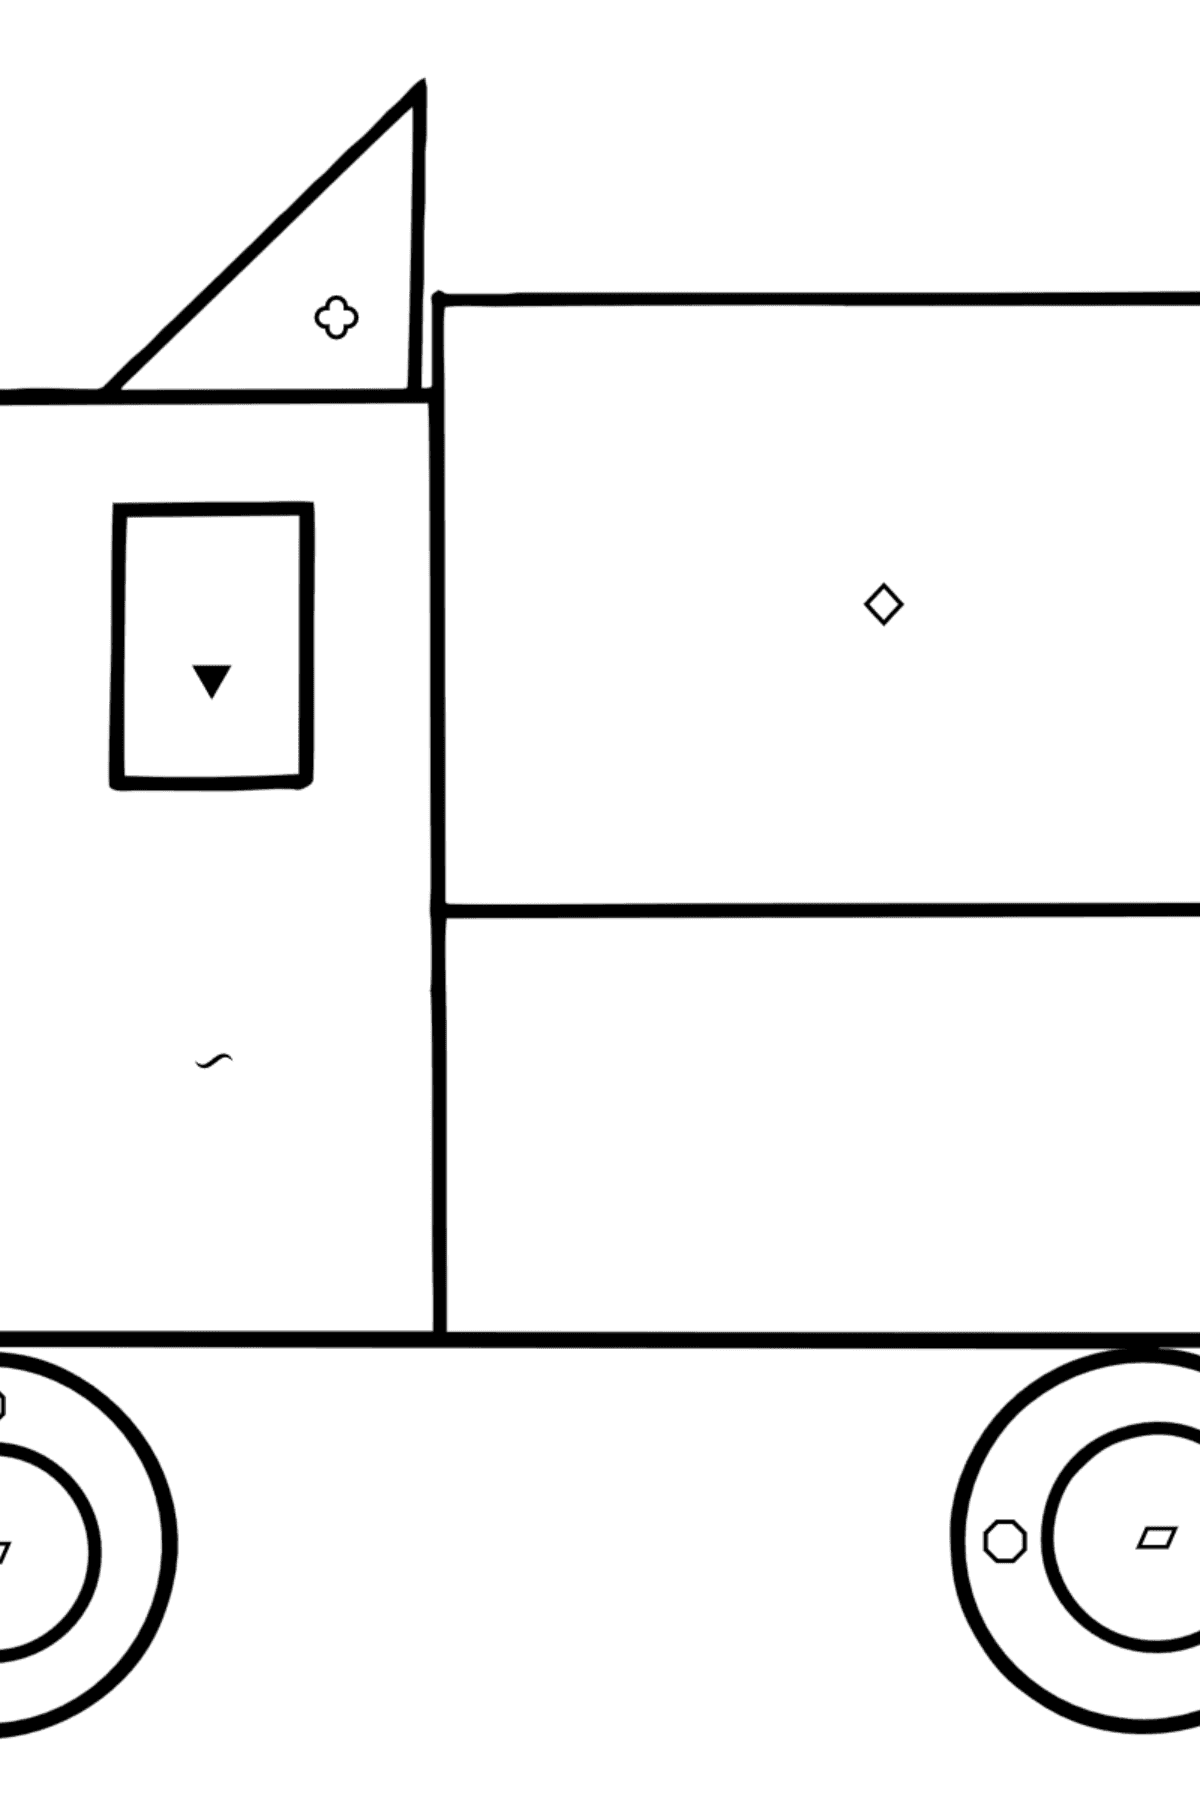 Geometric Truck coloring page - Coloring by Symbols and Geometric Shapes for Kids